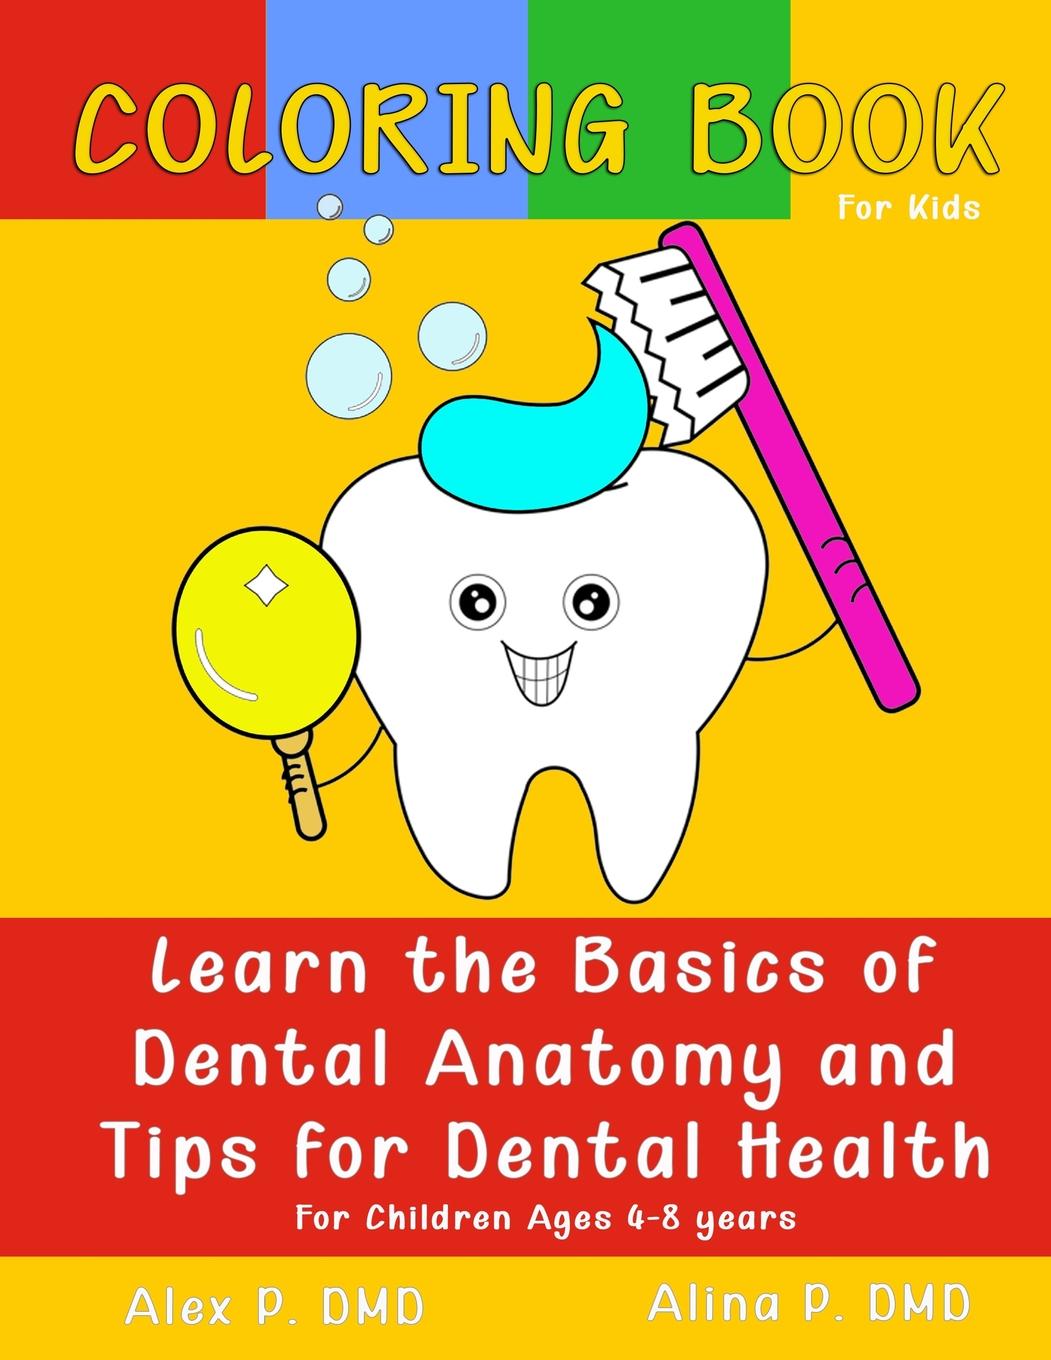 Coloring Book for Kids: Learn the Basics of Dental Anatomy and Tips for Dental Health: For Children Ages 4-8 years. (Paperback) - image 1 of 1